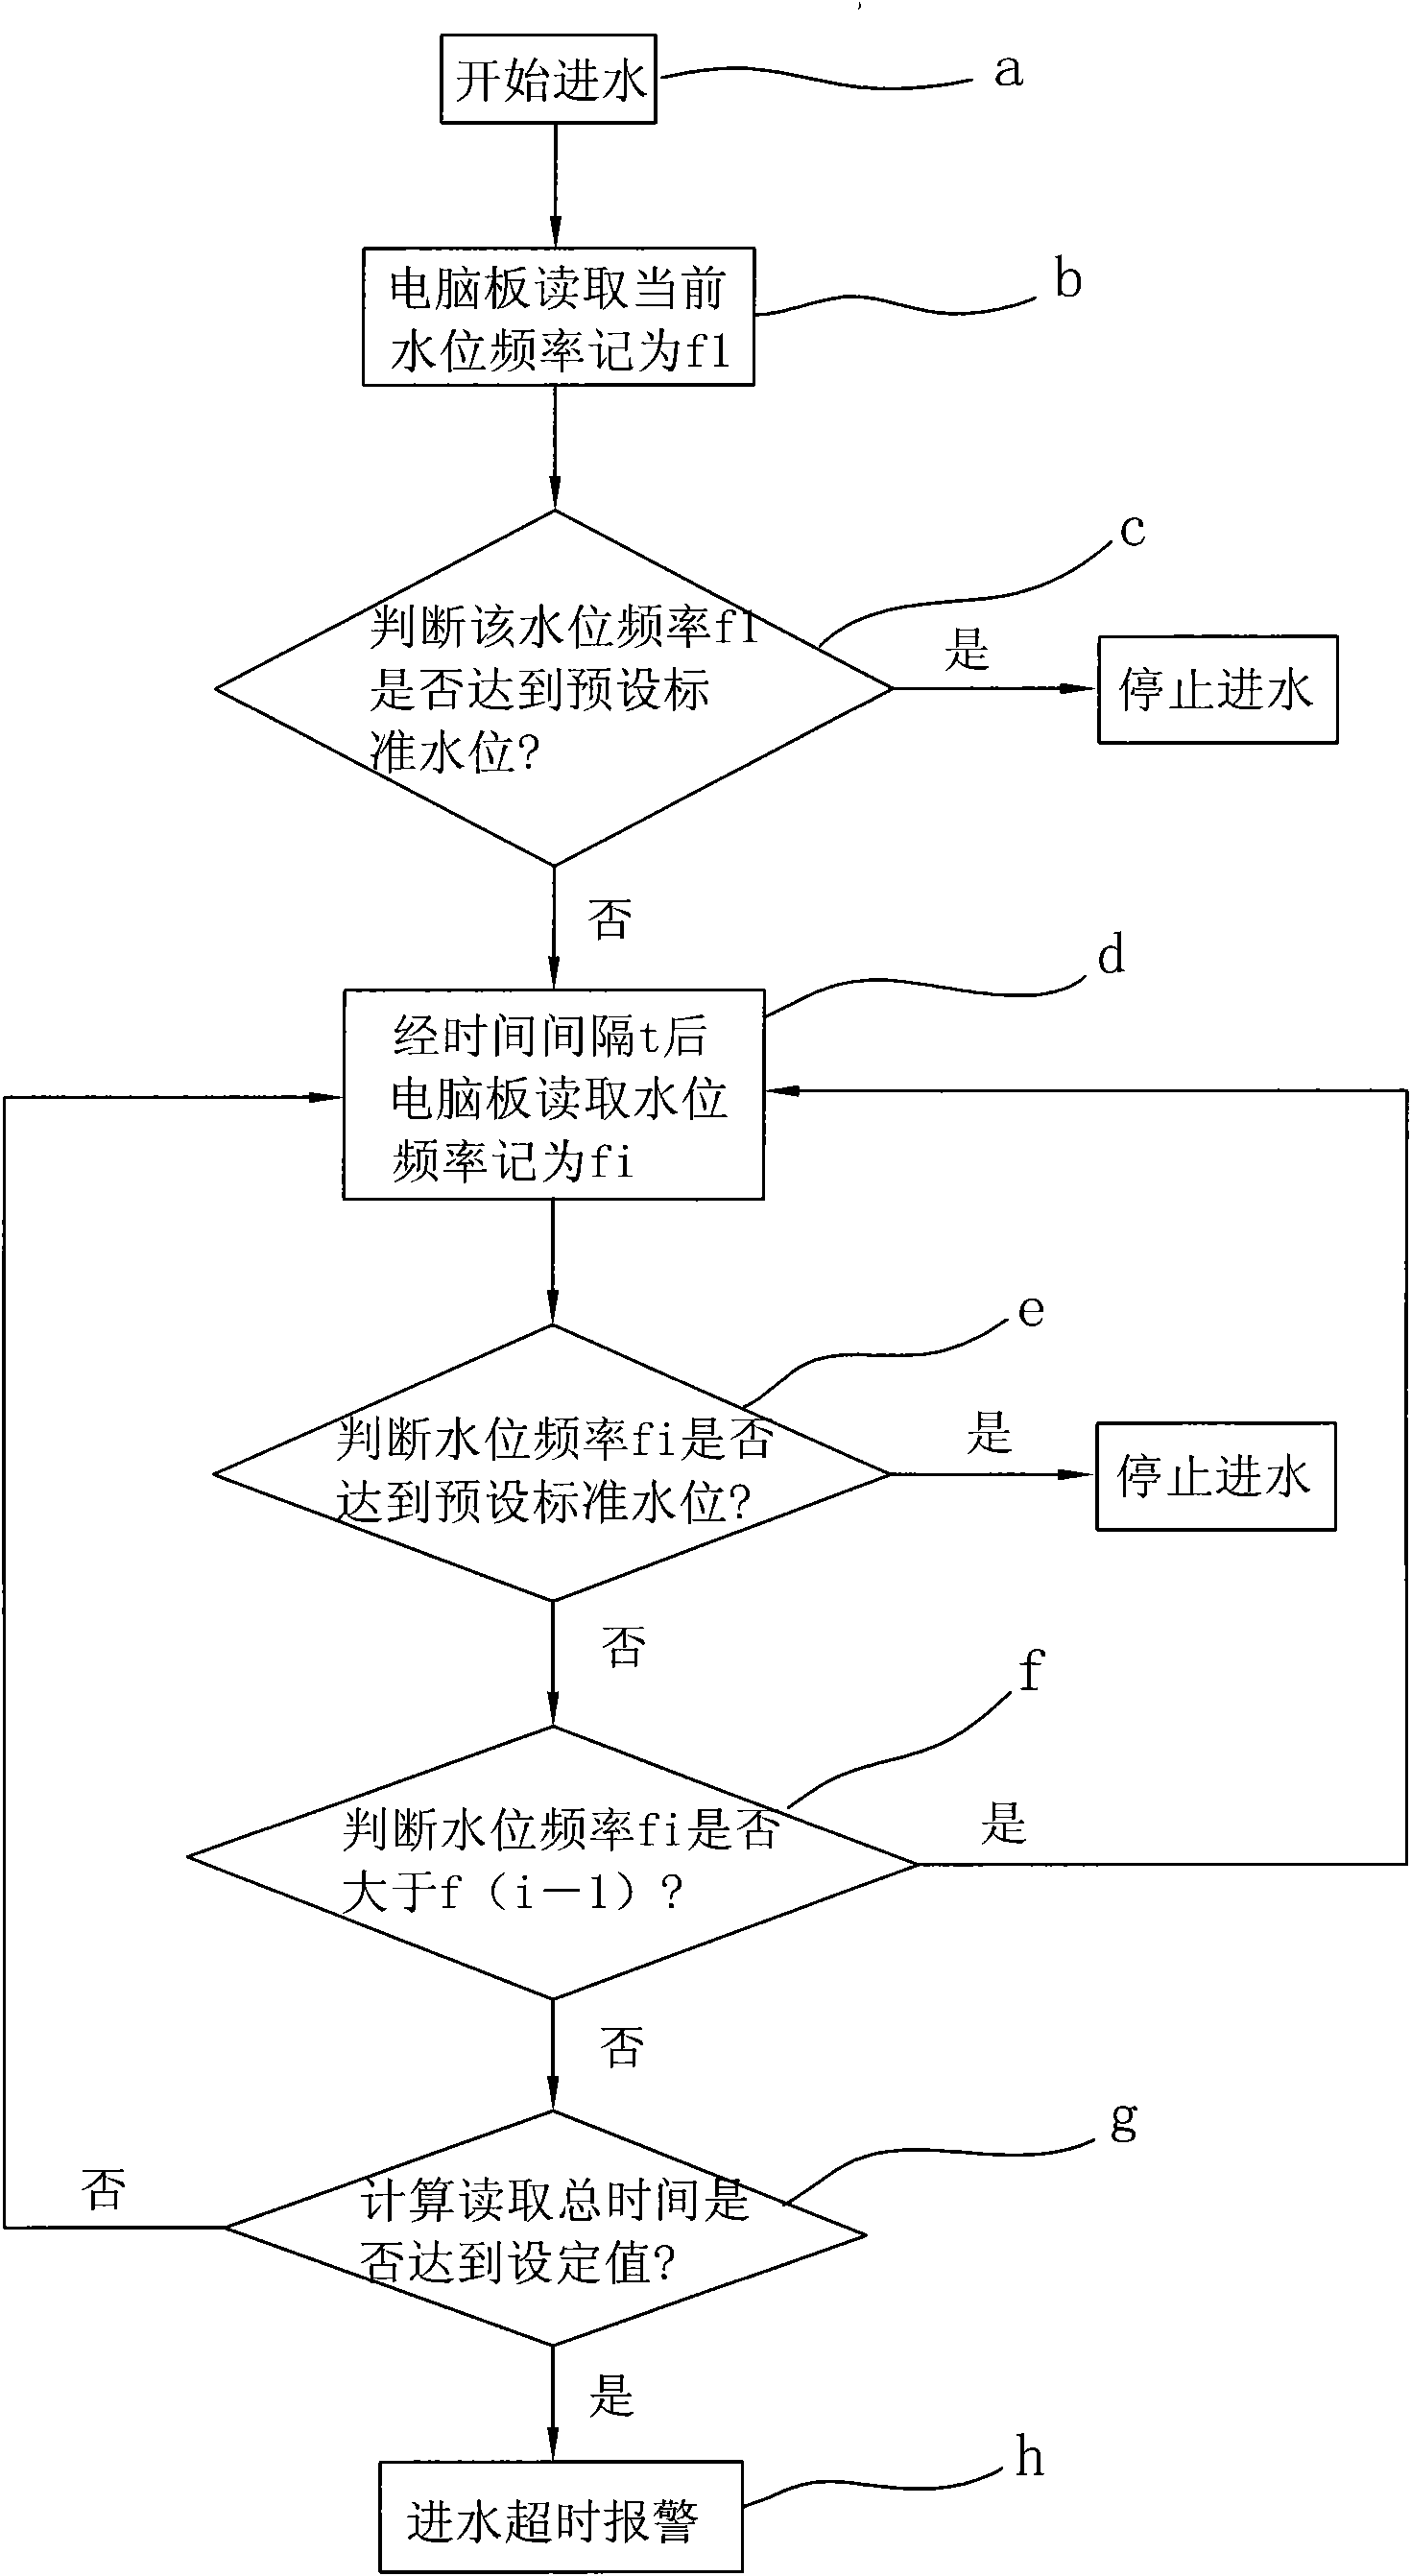 Method for monitoring water-charging process and water-discharging process of washing machine